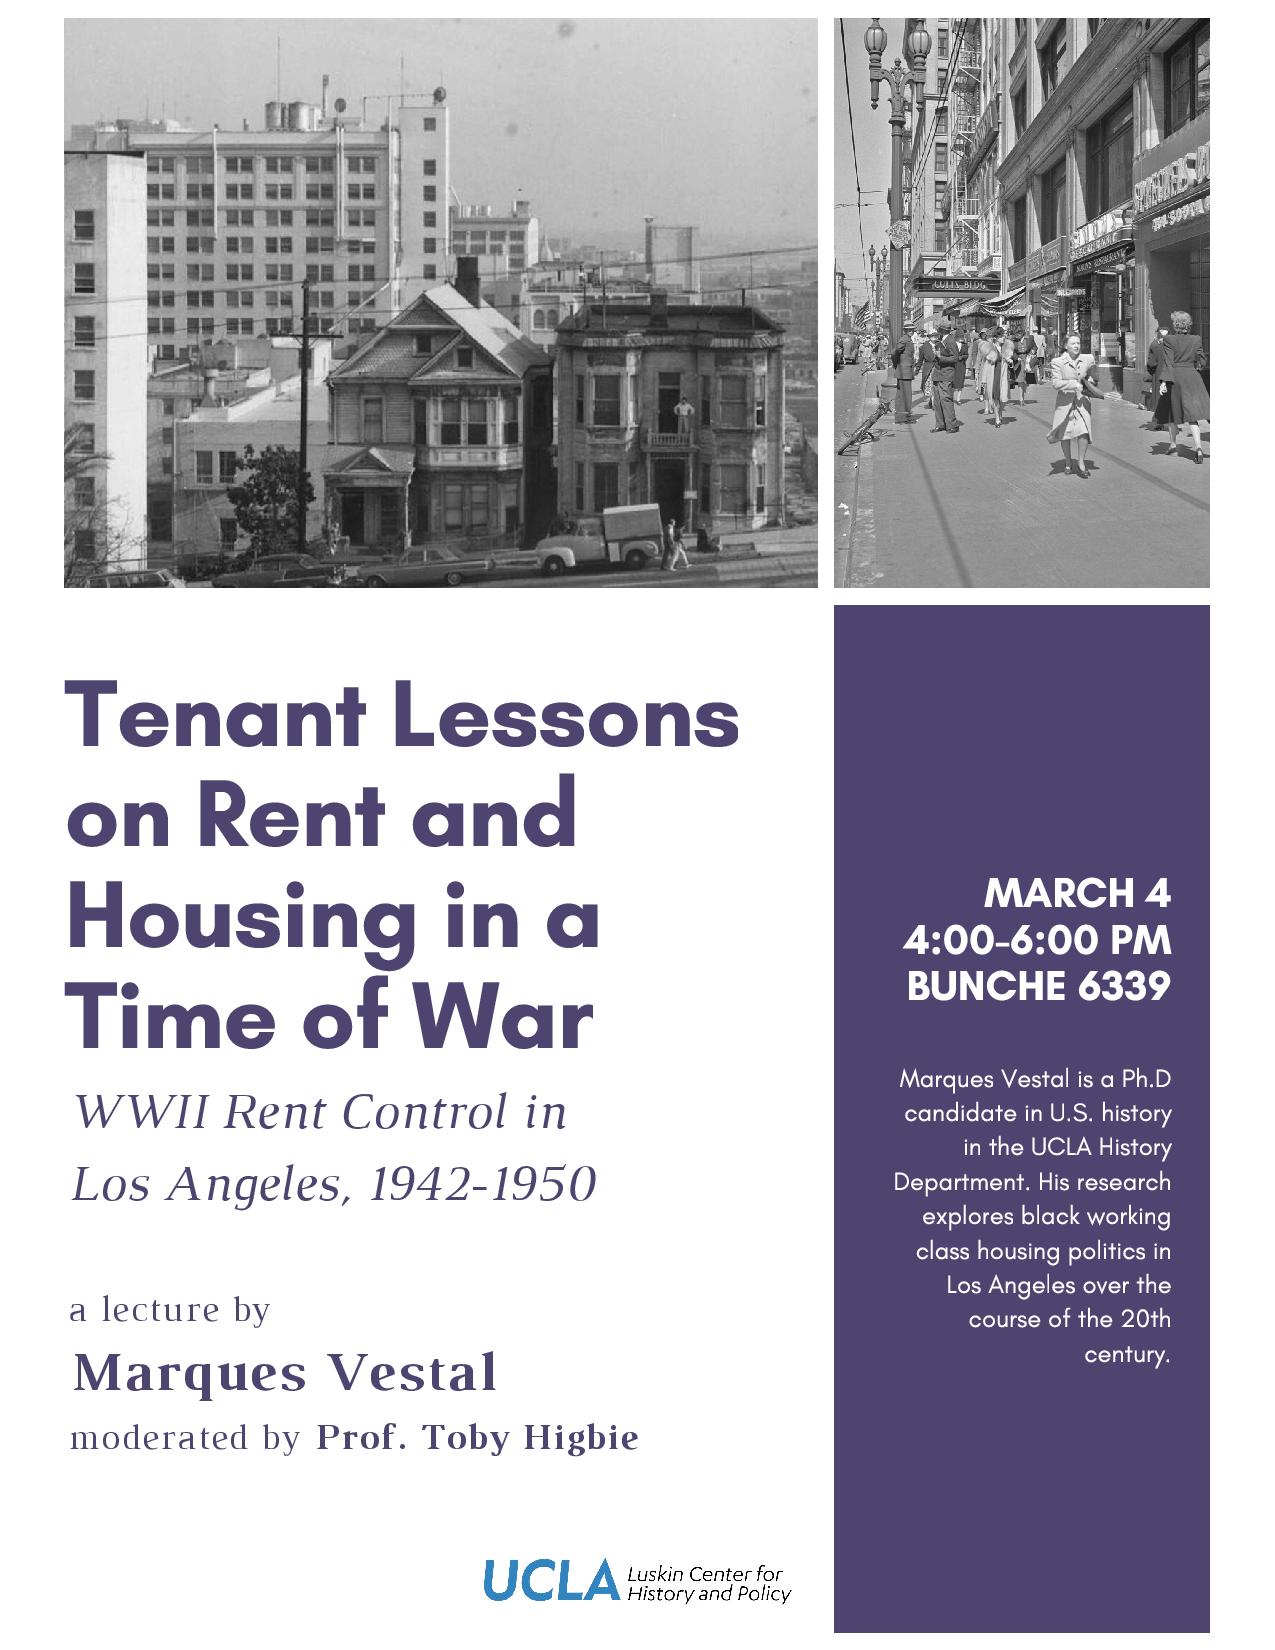 Marques (UCLA): “Tenant Lessons on Rent and Housing in a Time of WWII Control in Los Angeles, 1942-1950” | Luskin Center for History and Policy